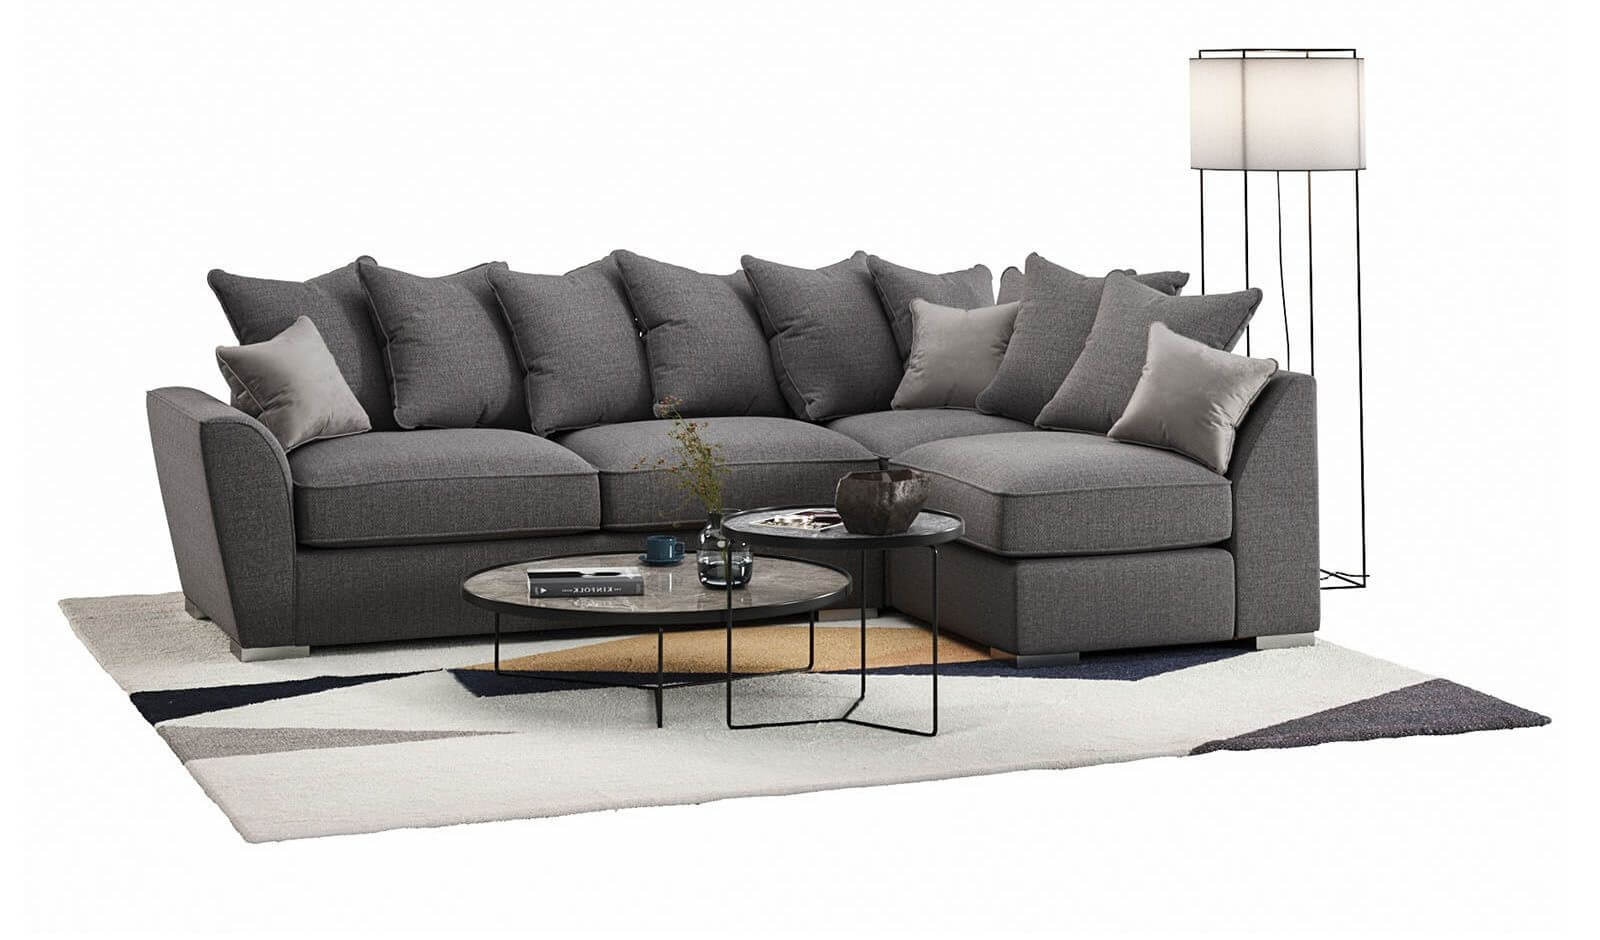 Showing image for Ellsworth left facing chaise sofa